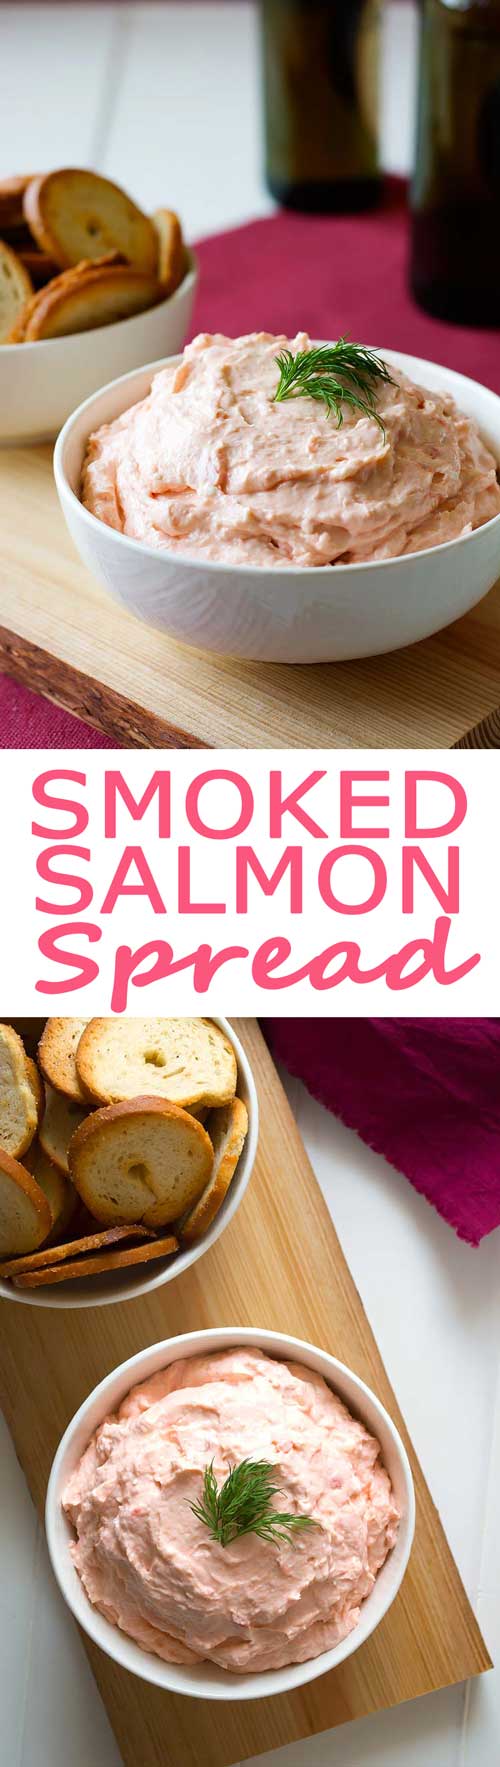 Rich and creamy smoked salmon appetizer dip with cream cheese. Serve this easy spread with bagel chips or veggies! #appetizer #smokedsalmon #dip #creamcheese